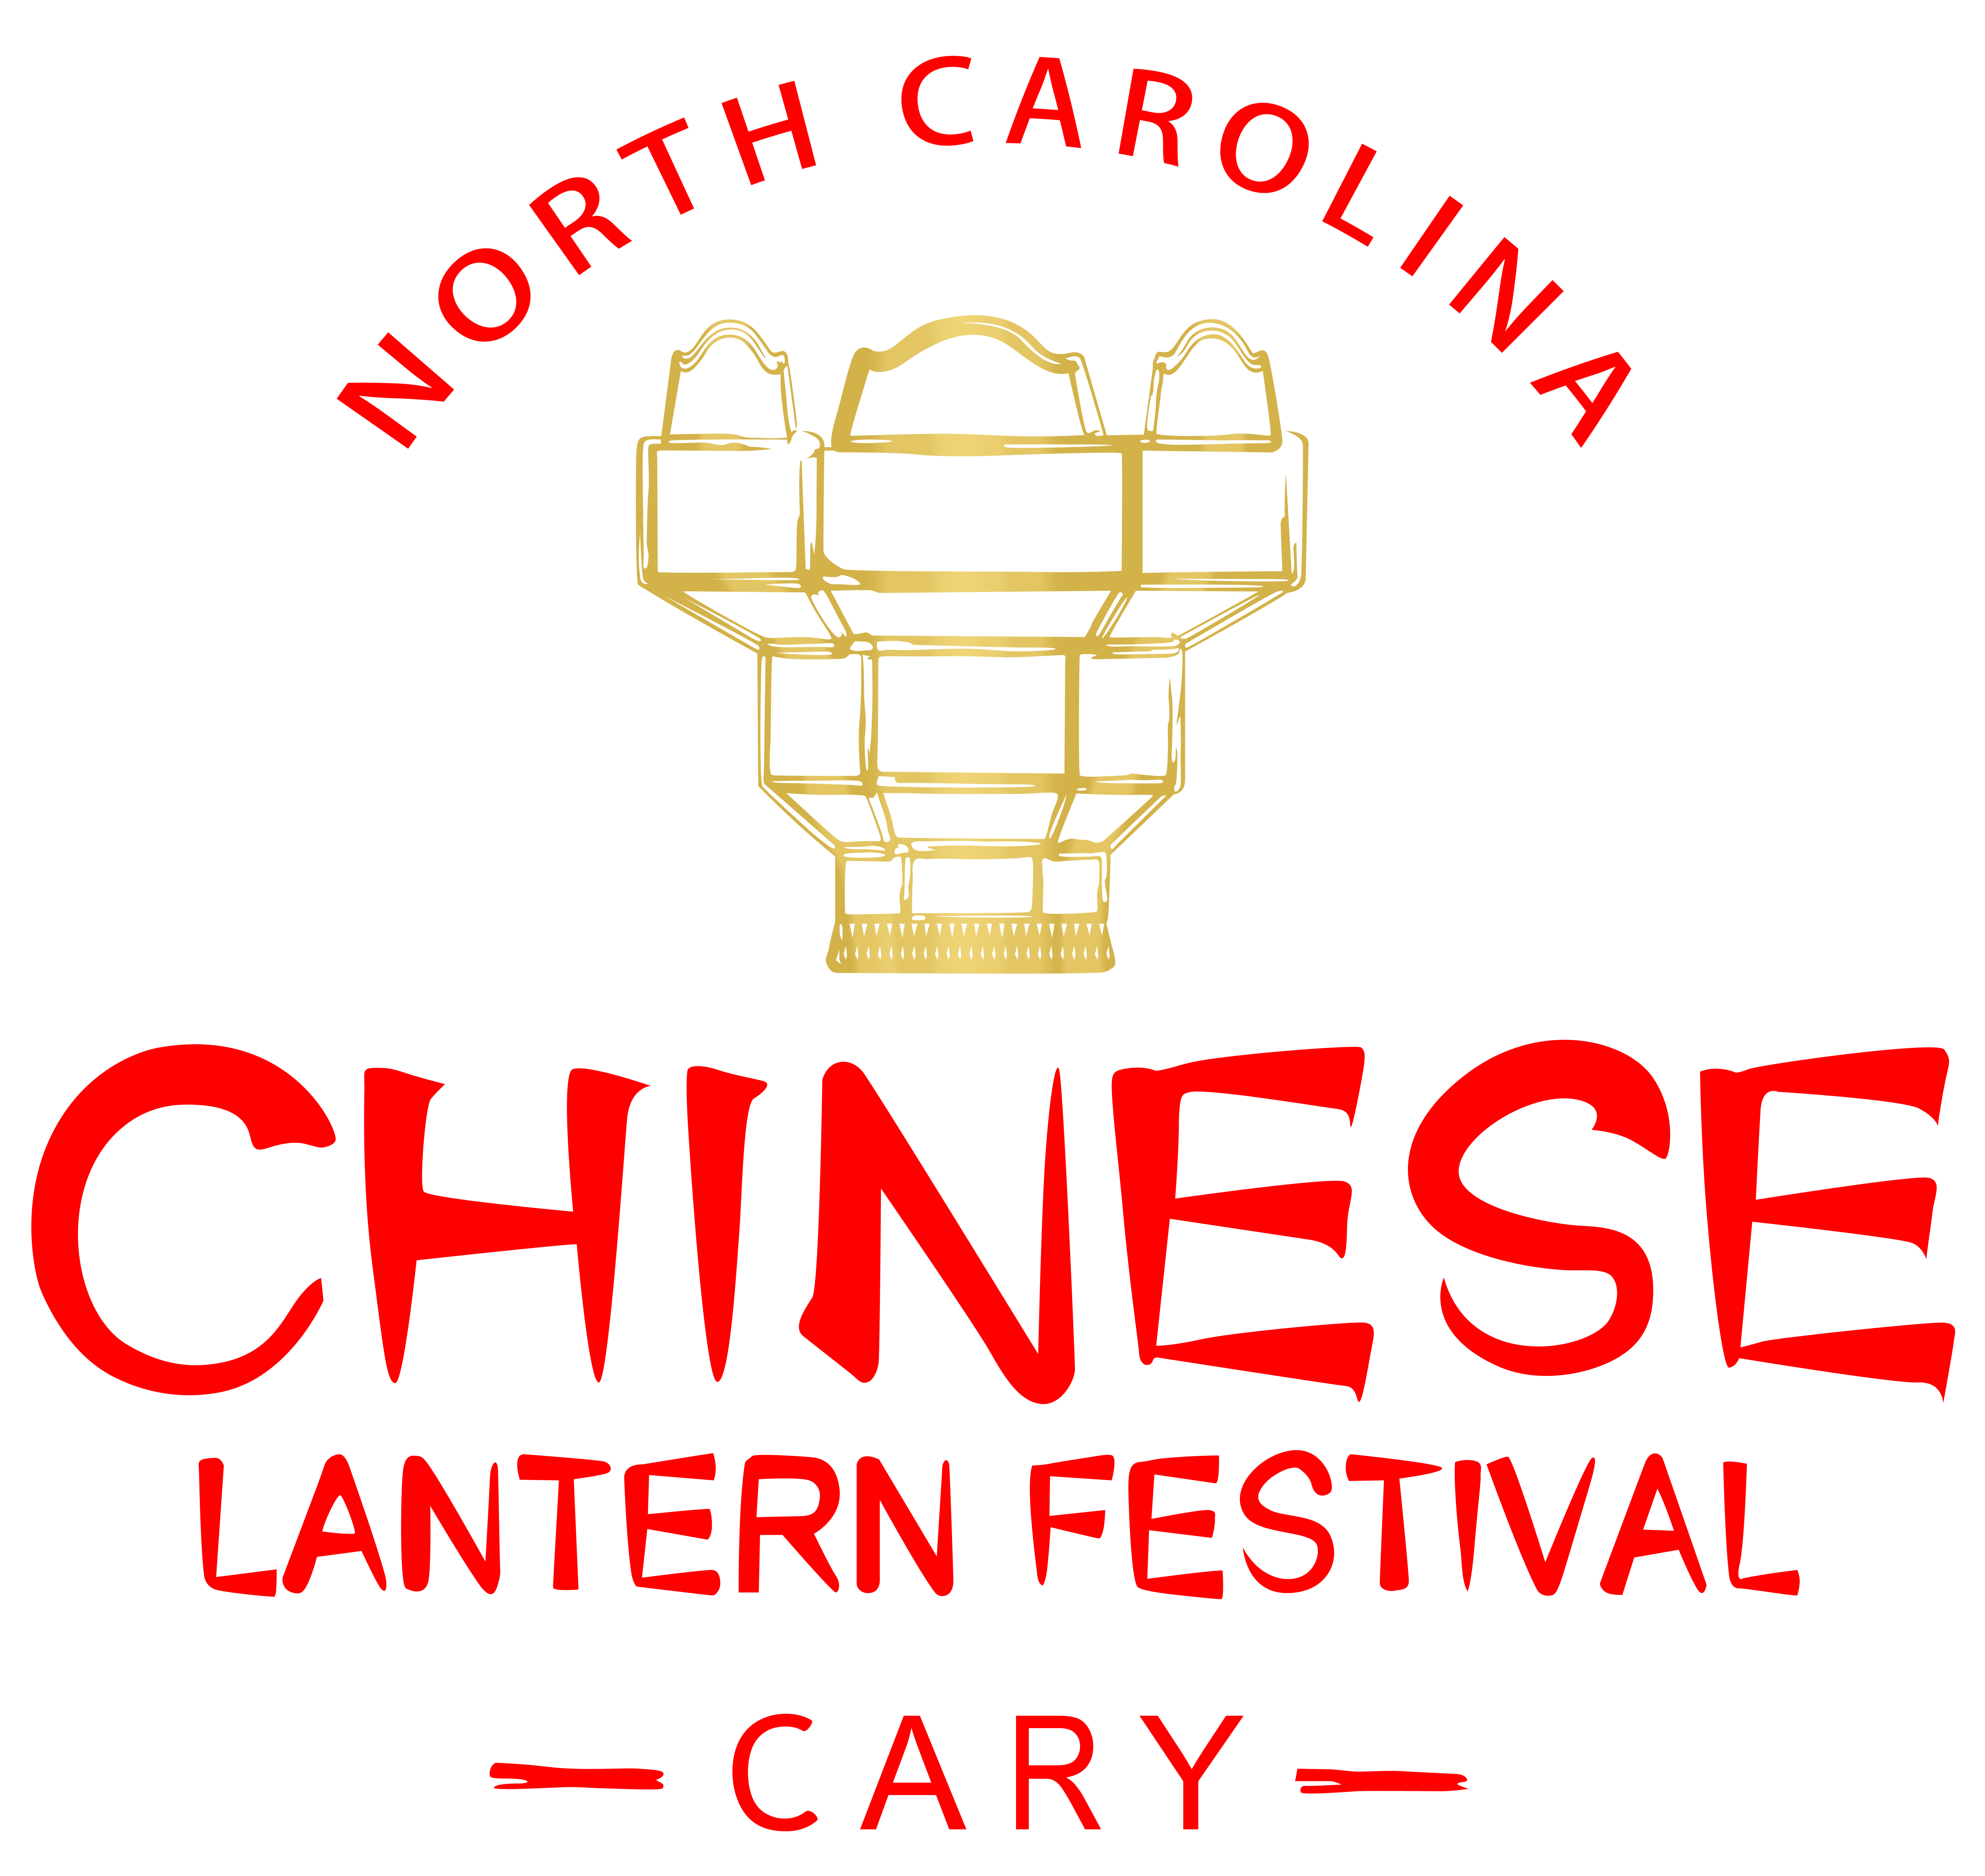 More Info for For the First Time Ever North Carolina Chinese Lantern Festival to offer Sensory Friendly Night presented by “We Rock the Spectrum-Cary” on Tuesday, December 6th